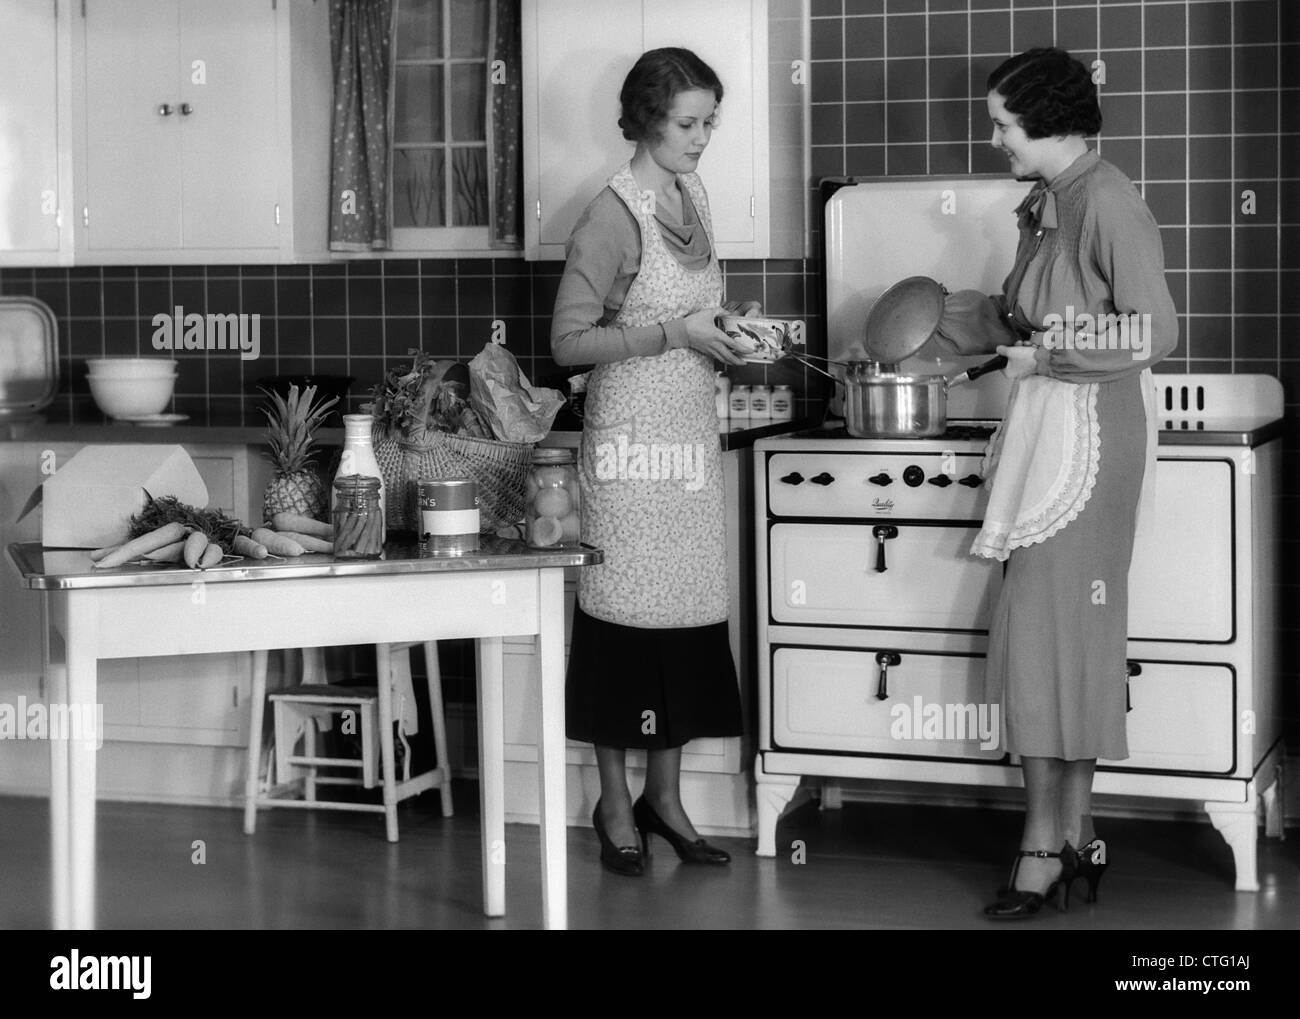 1930s WOMAN HOUSEWIFE AND FRIEND WEARING APRON COOKING FOOD IN KITCHEN ON GAS STOVE INDOOR Stock Photo